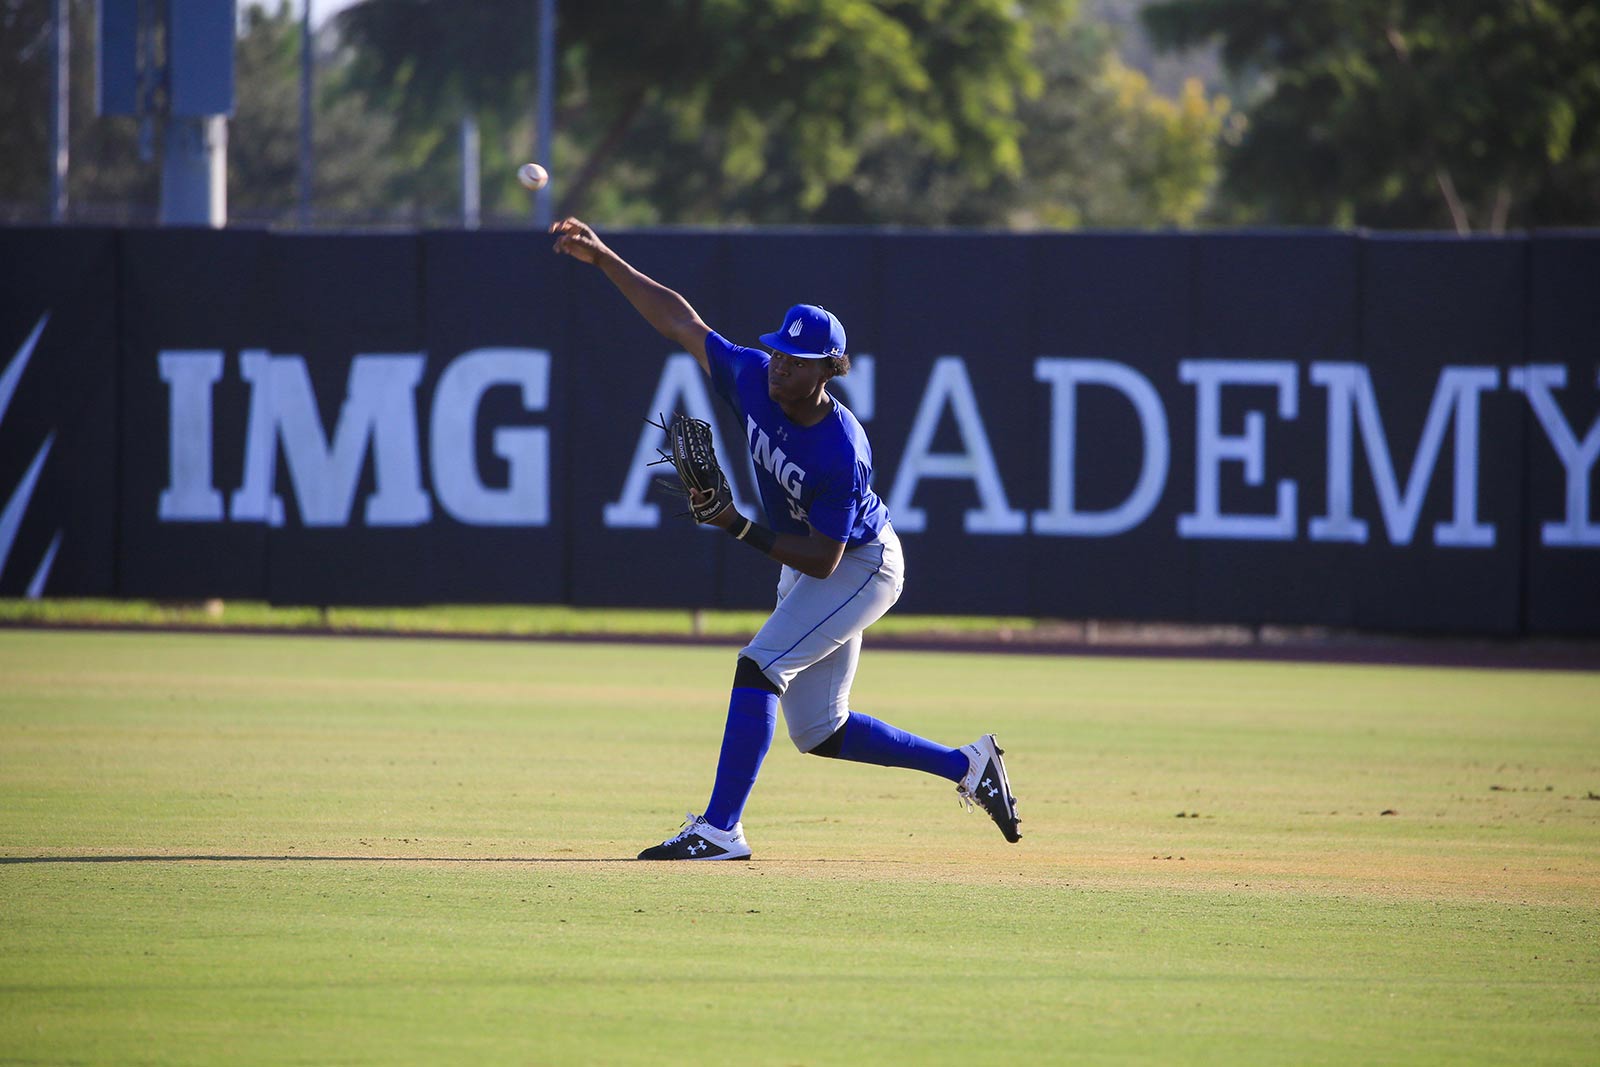 IMG Academy baseball player throws baseball to homeplate from the outfield